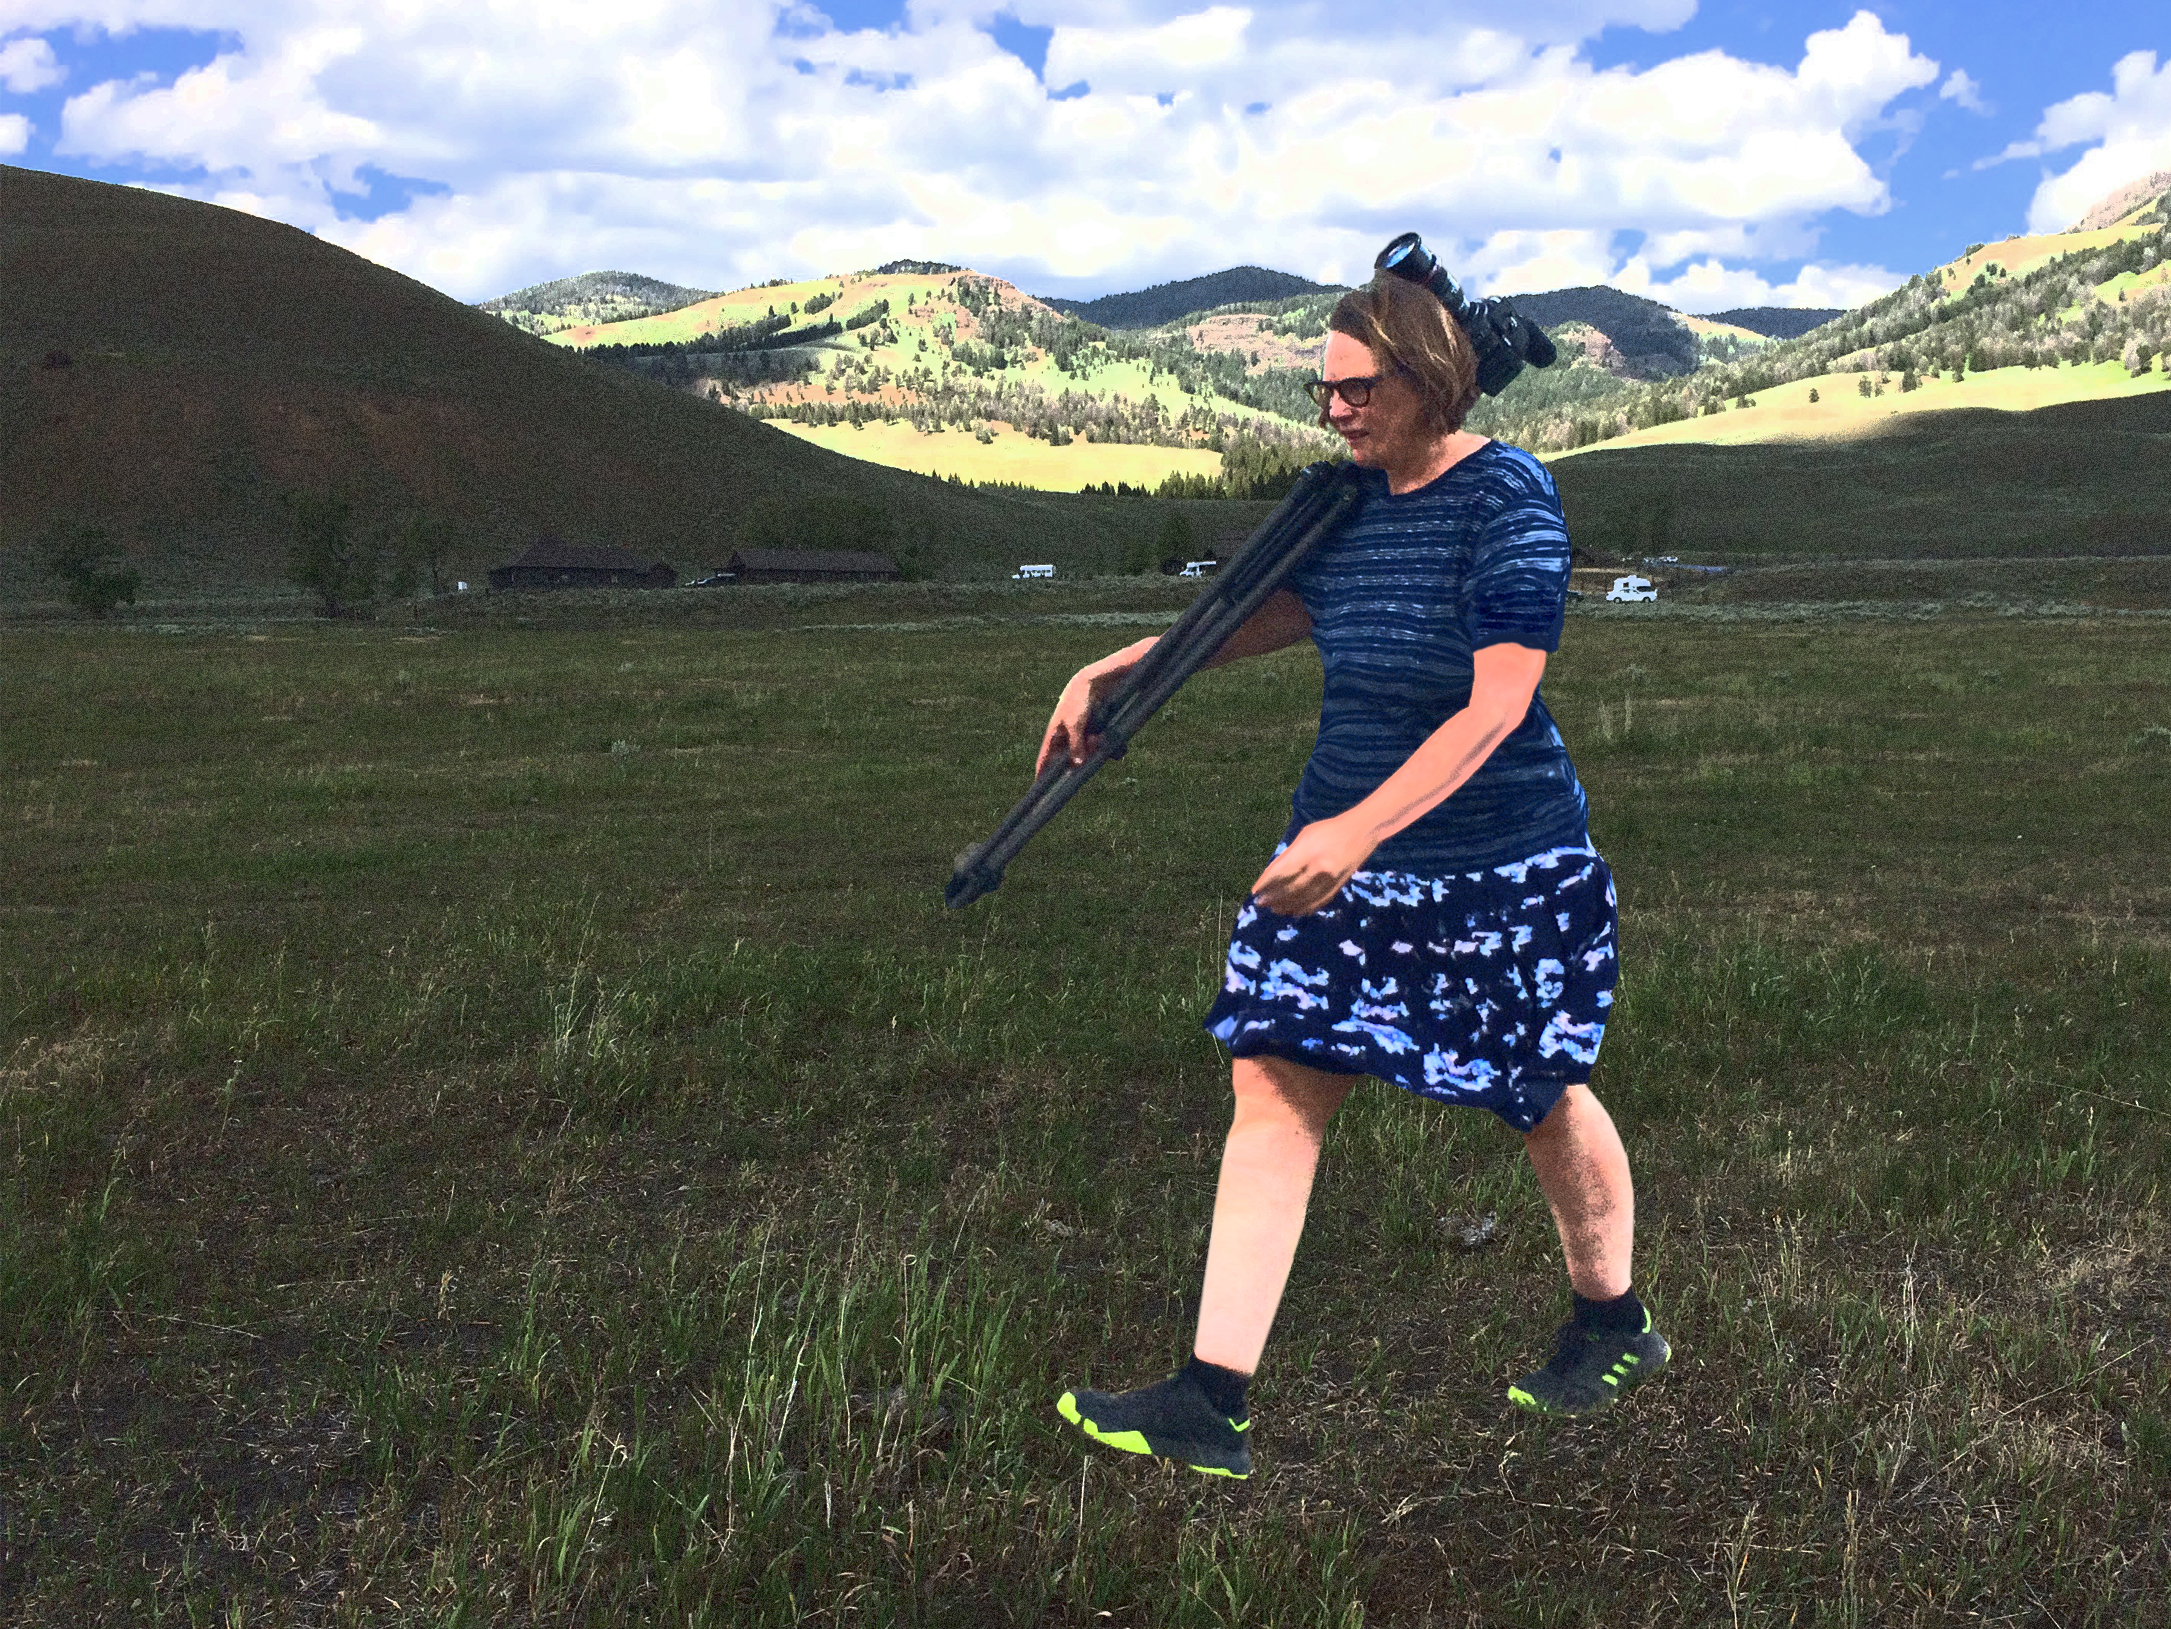  Hunting Buffalo in the Lamar Valley, Yellowstone National Park. Filtered photograph/artist's rendering, 2016, Erin L. FitzGerald. 